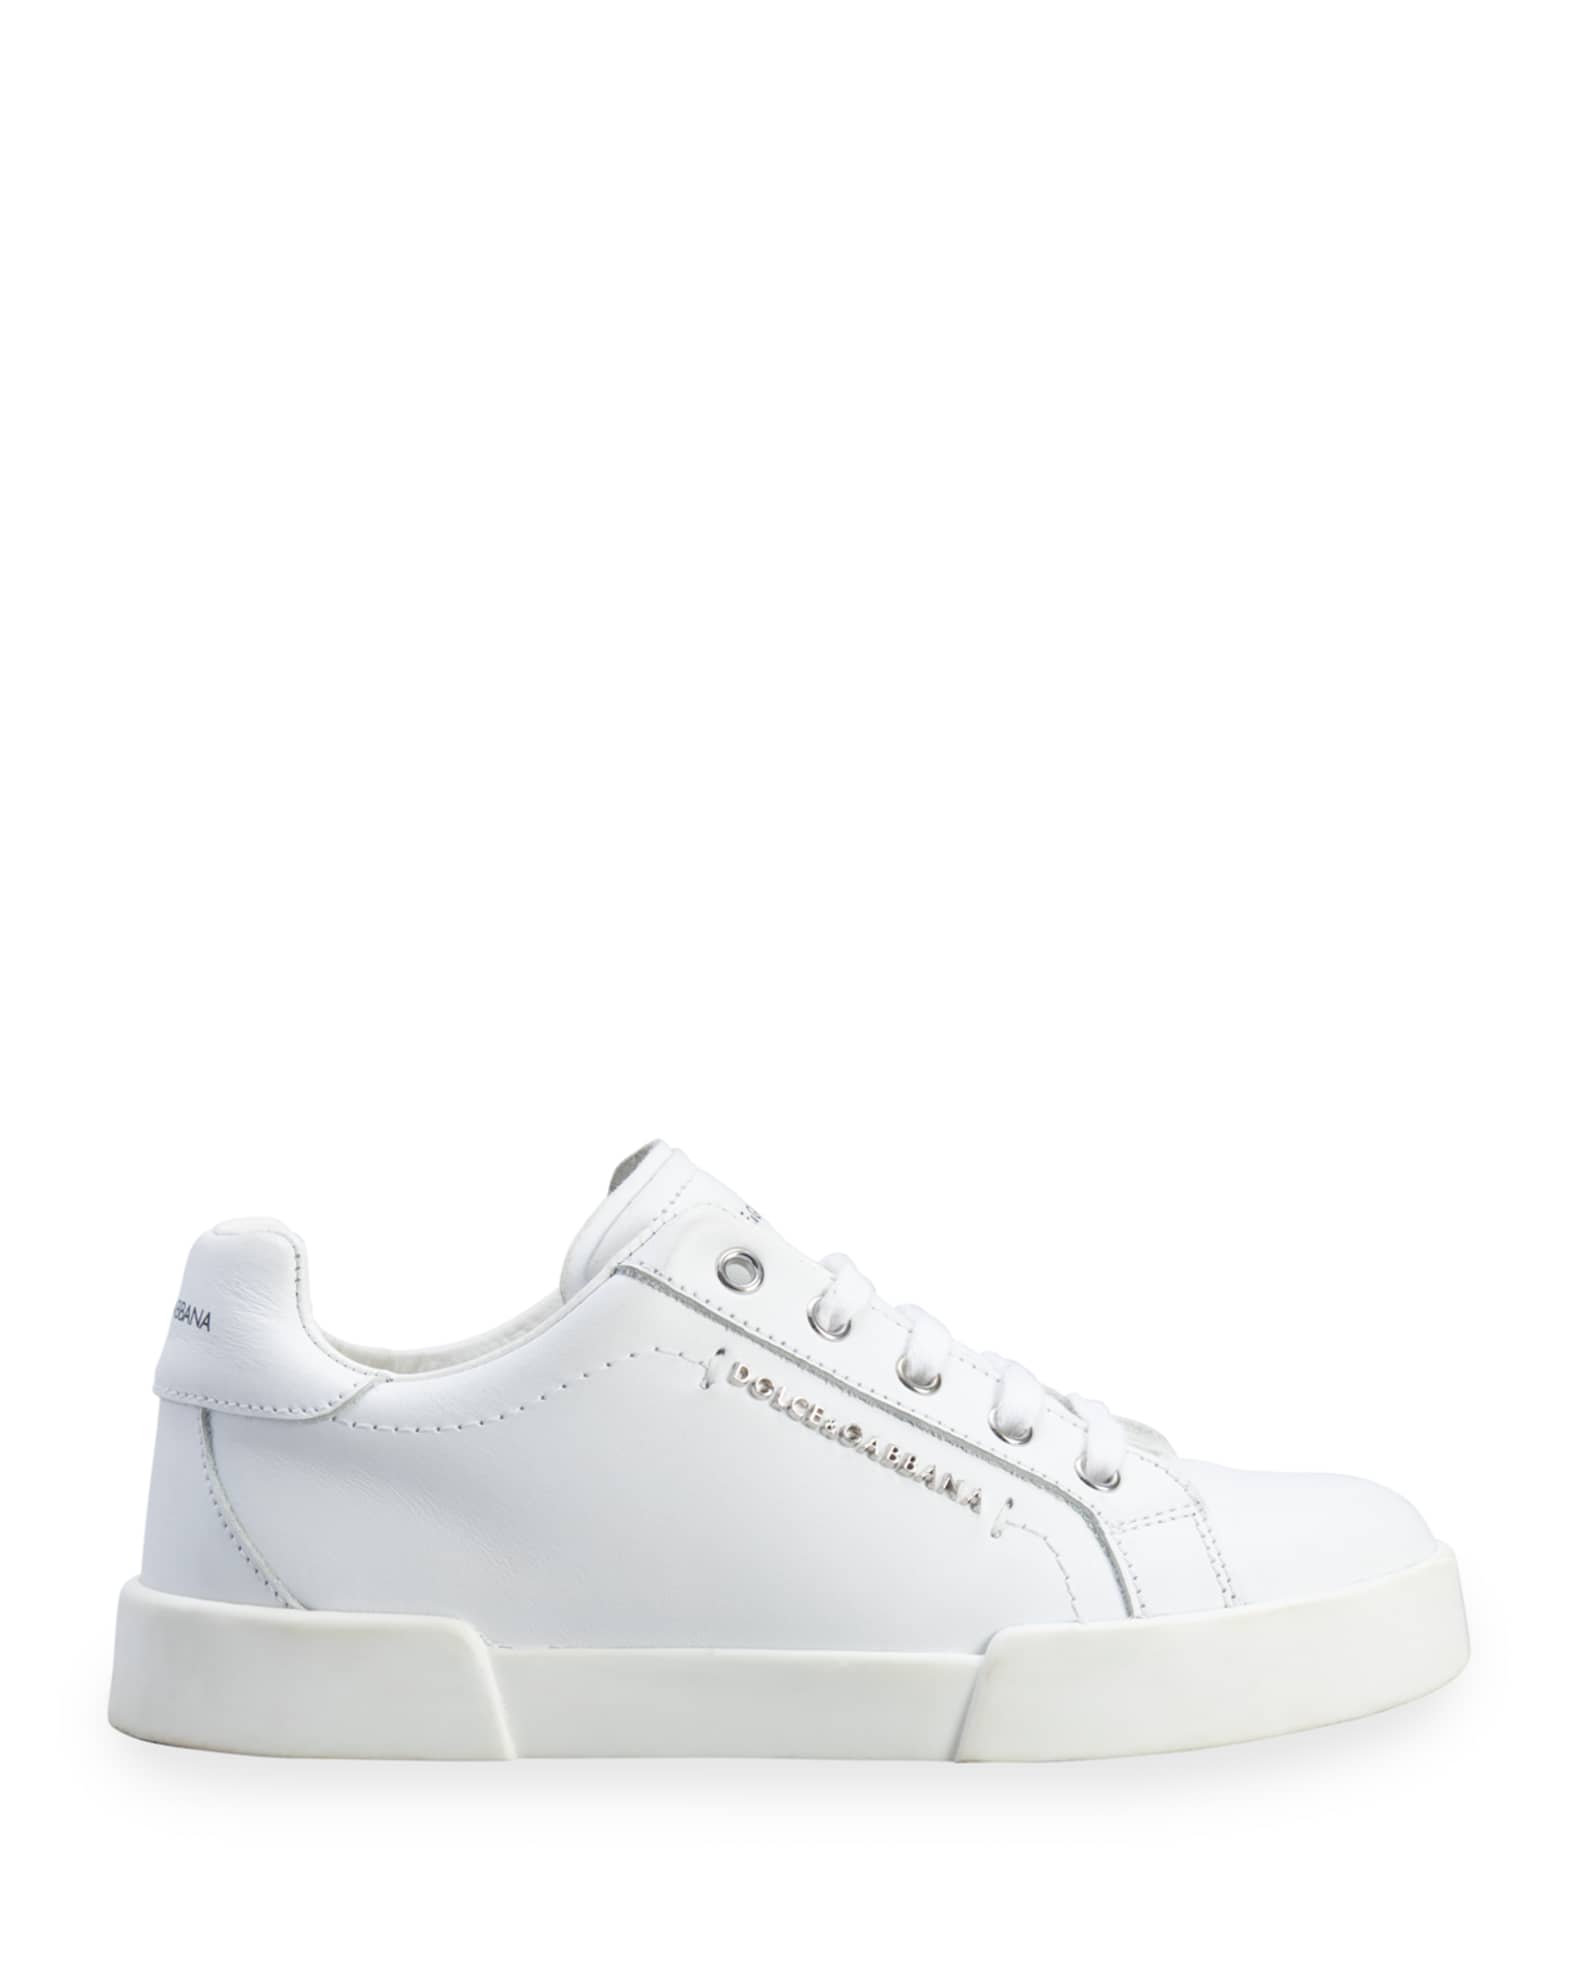 Dolce&Gabbana Kid's Logo Leather Low-Top Sneakers, Toddlers | Neiman Marcus